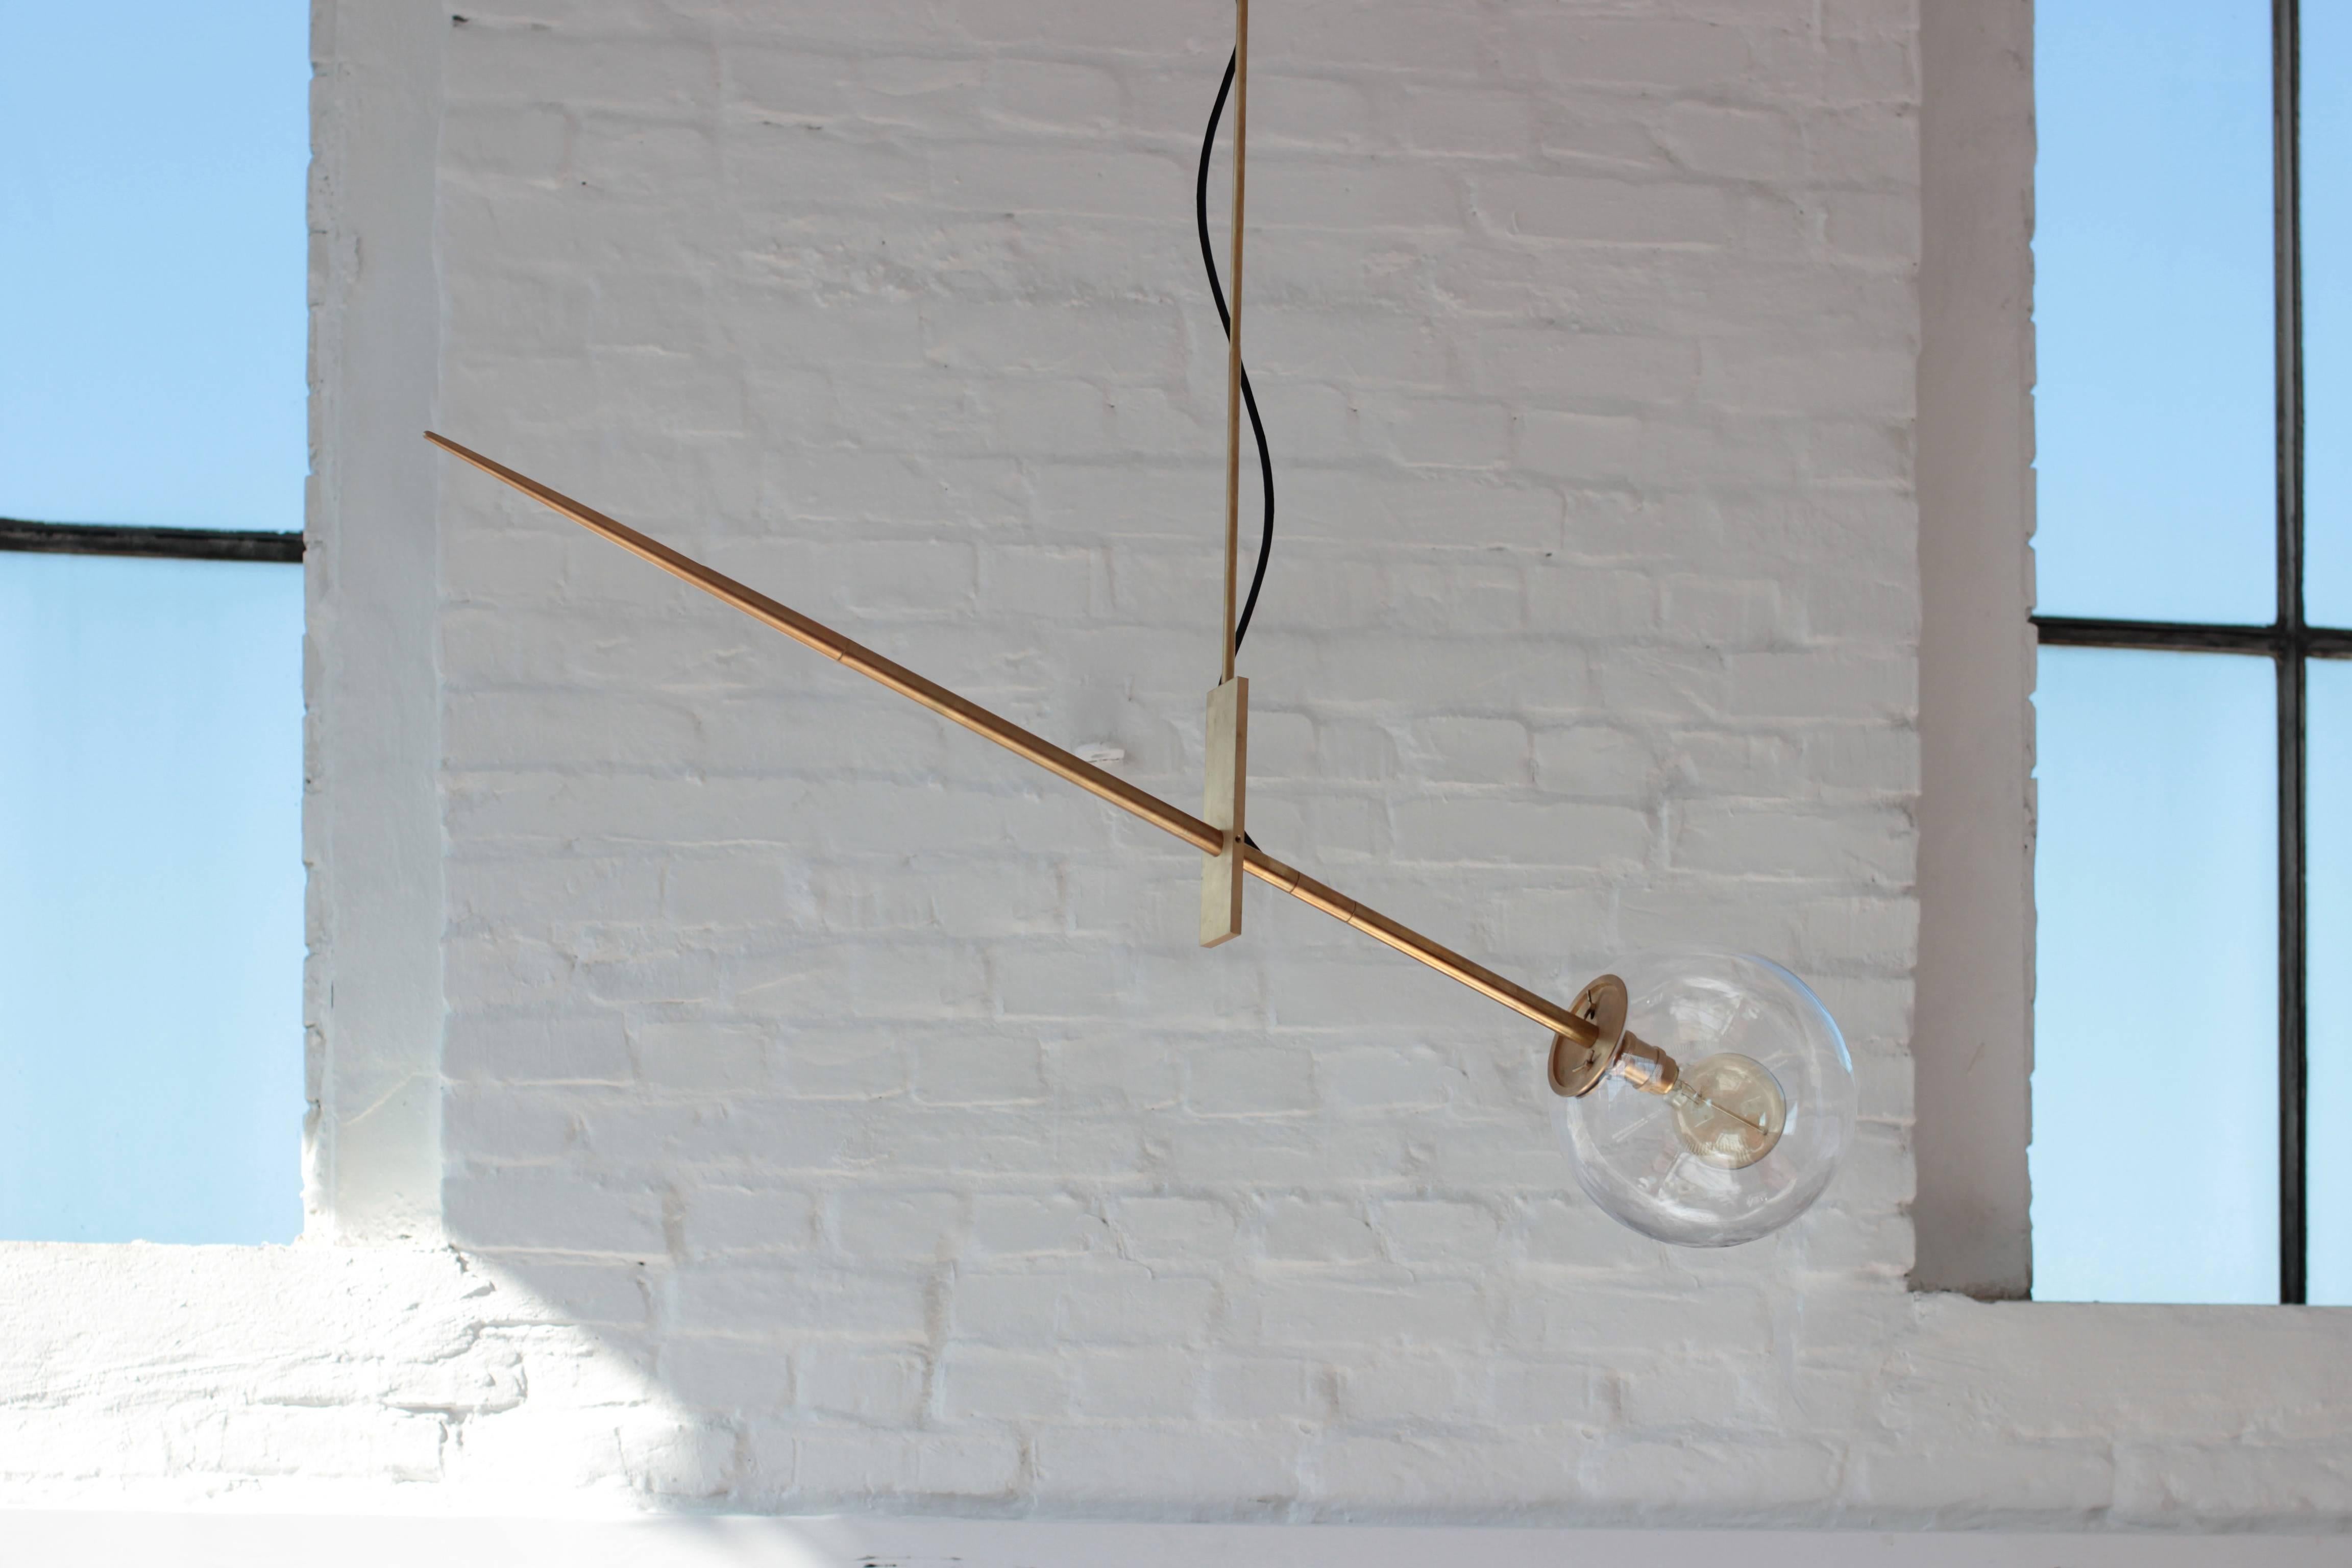 Hasta hanging lamp by Jan Garncarek
Brass ceiling lamp with a glass shade. The elements are made of full brass.
The supplied cable is available in two colors, black or red. Best matches the decorative bulb.
You can order the lamps of different